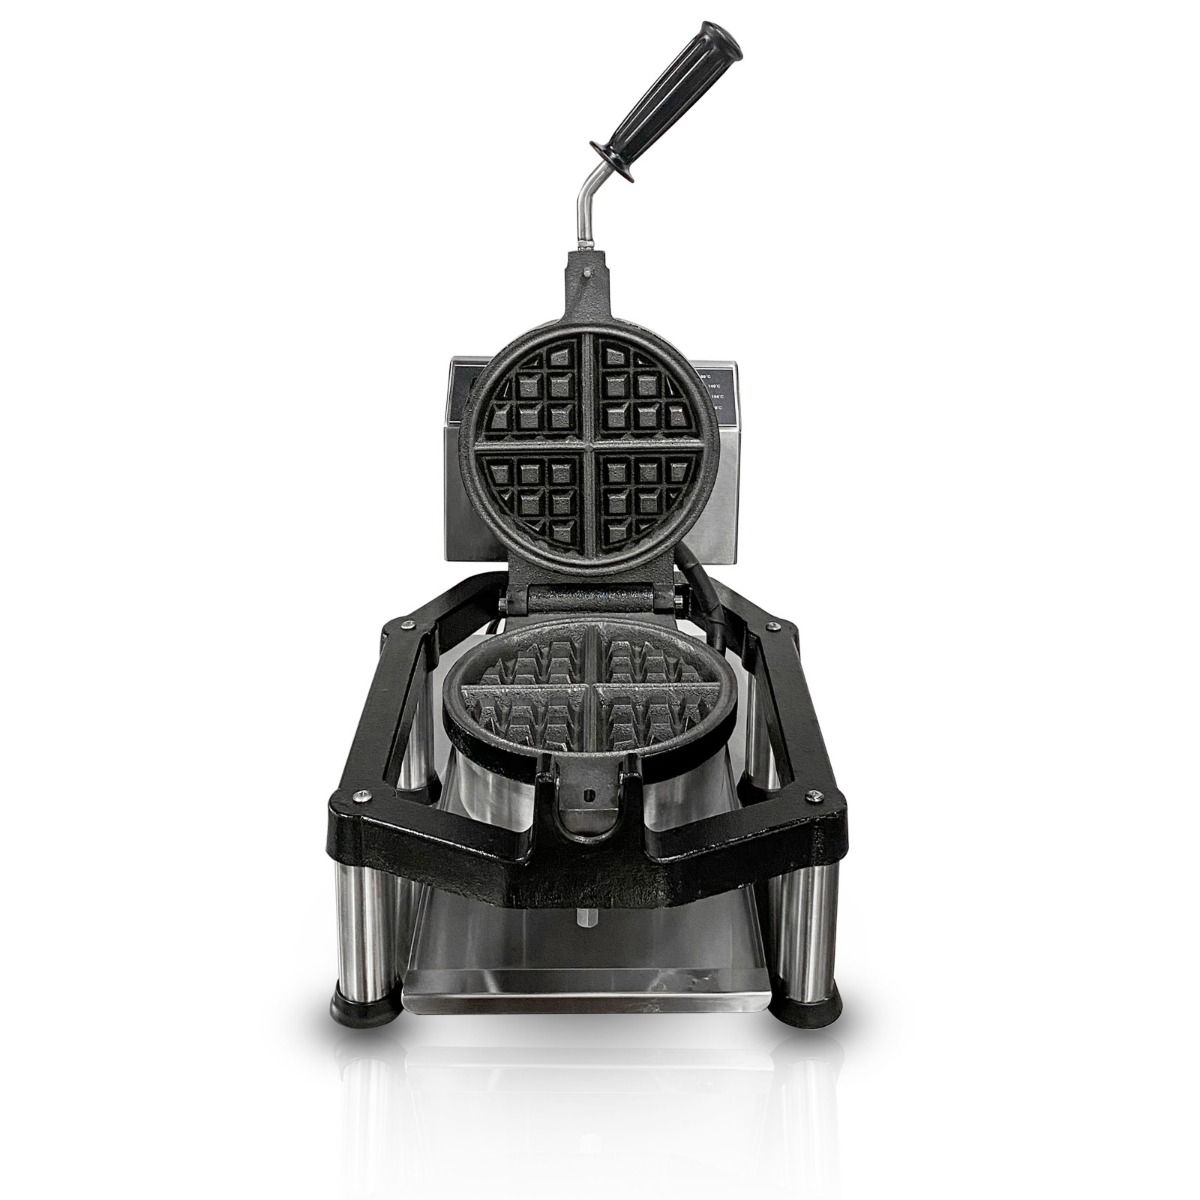 Euro Round Rotating Waffle Maker - 180° From MAYFAIR - Silver